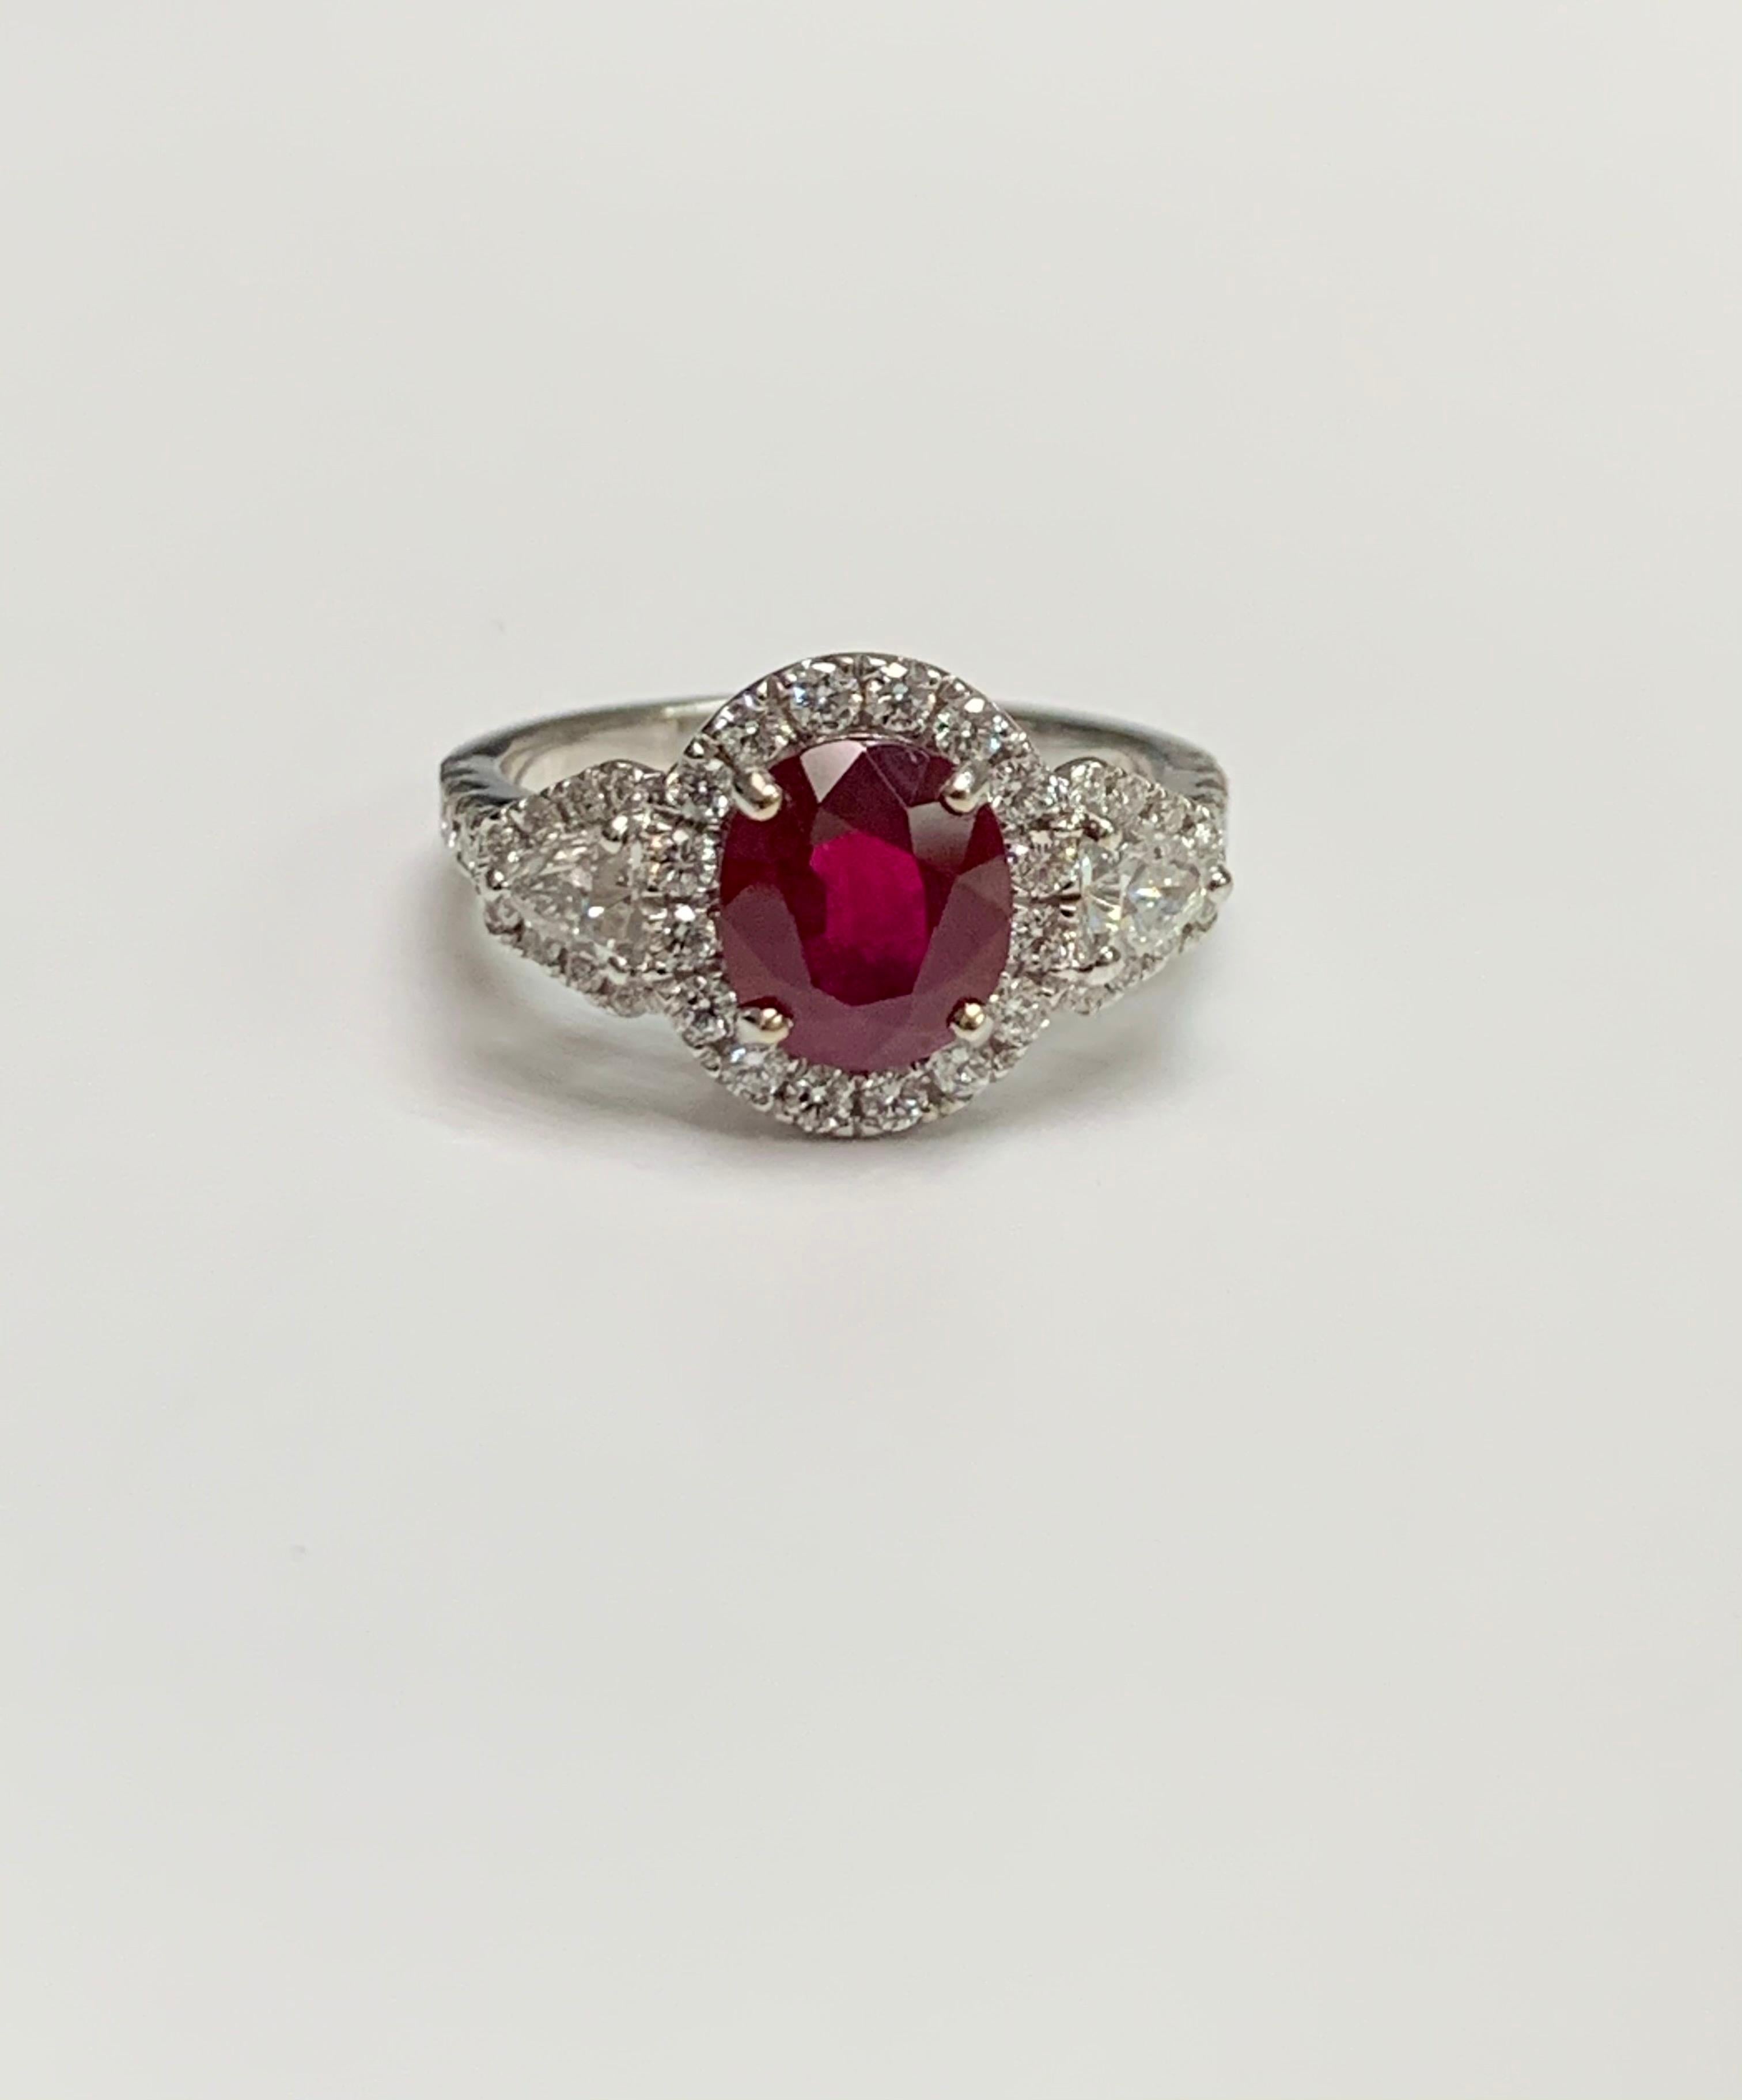 2.36 Carat oval cut Burma Ruby set in 18k white gold ring surrounded with 0.69 ct diamonds around it, shield cut diamonds on the shoulder and diamonds half way on the shank .